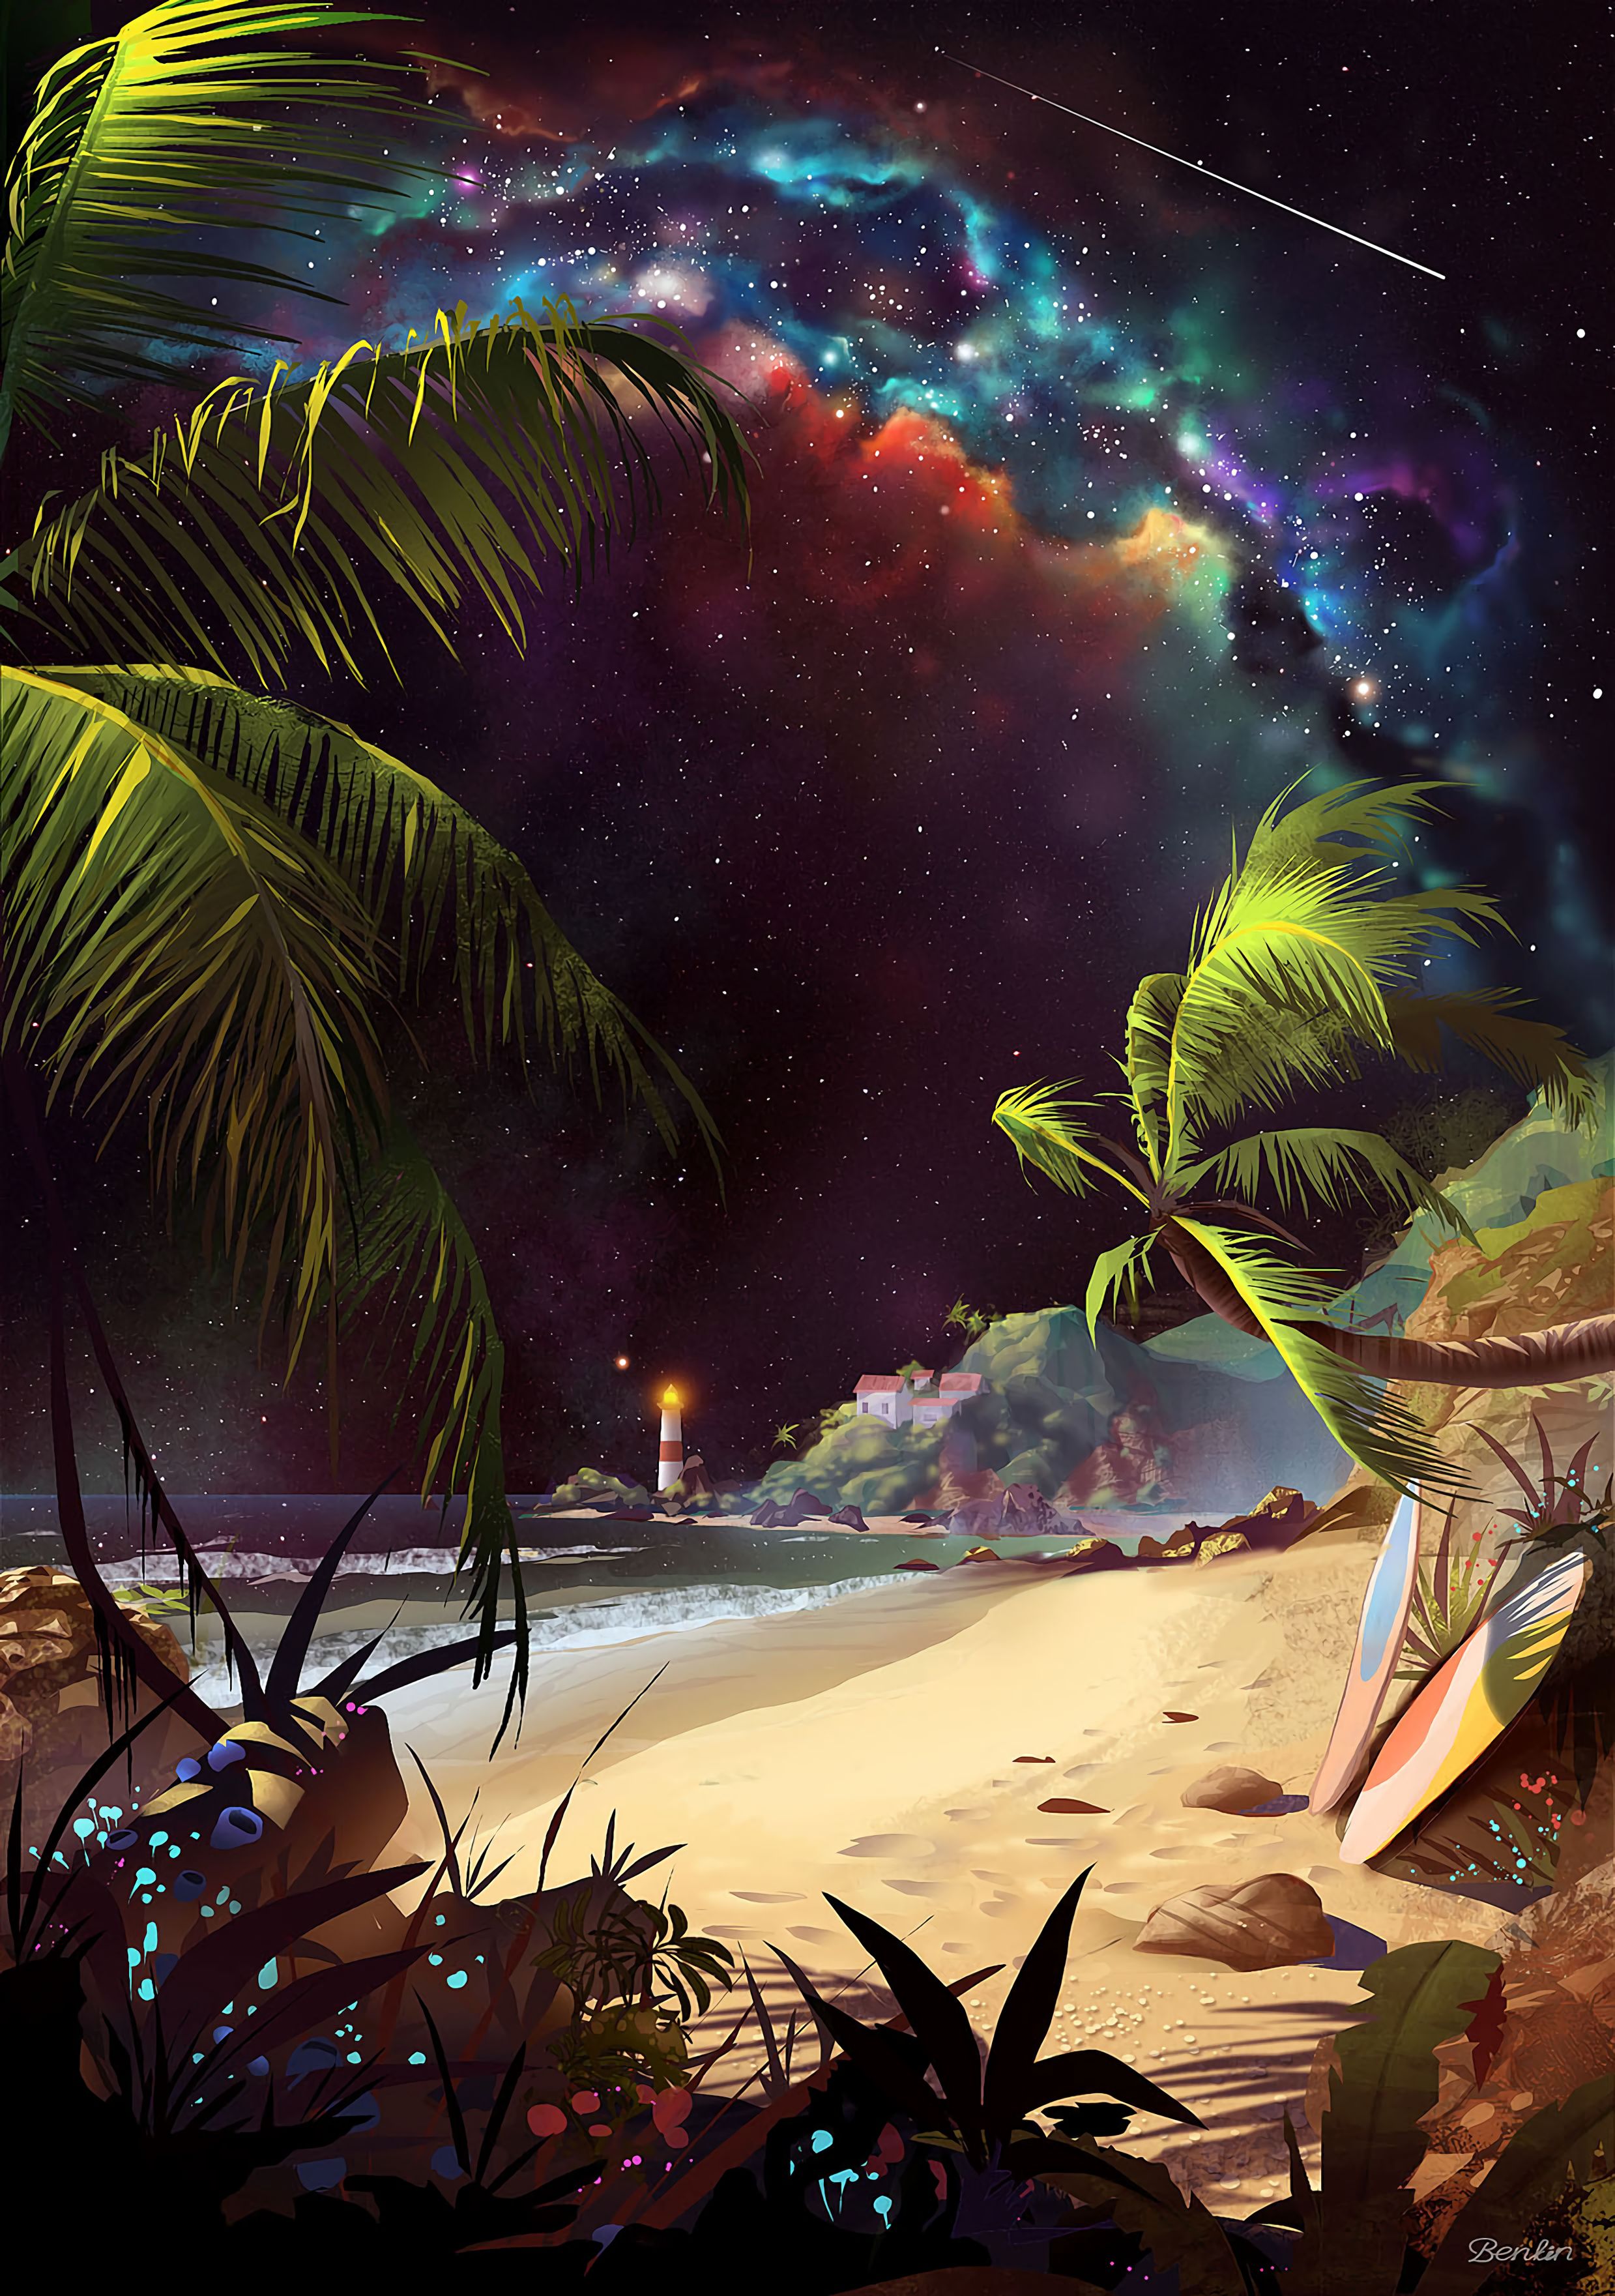 132333 free wallpaper 240x320 for phone, download images starry sky, lighthouse, beach, palms 240x320 for mobile